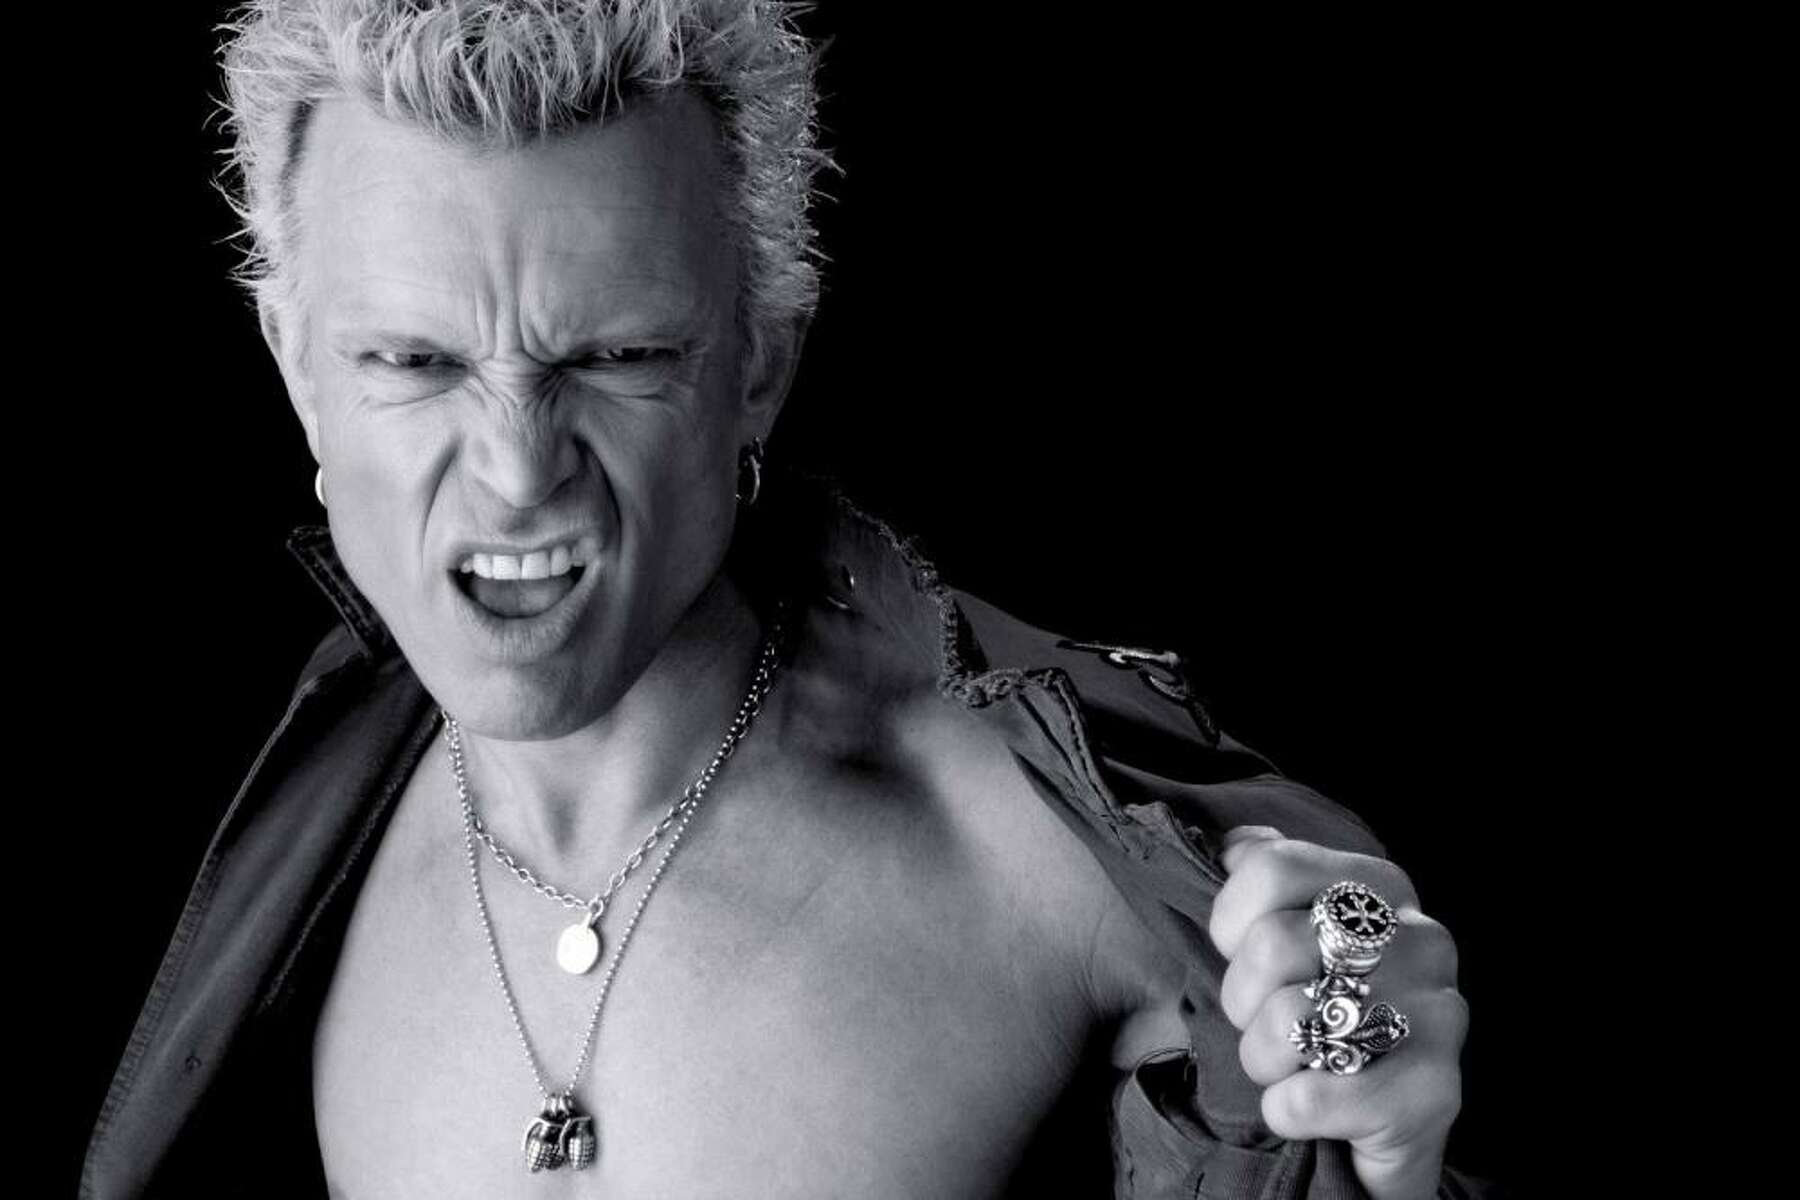 Concert Connection: Billy Idol headlines at the Big E Sept. 